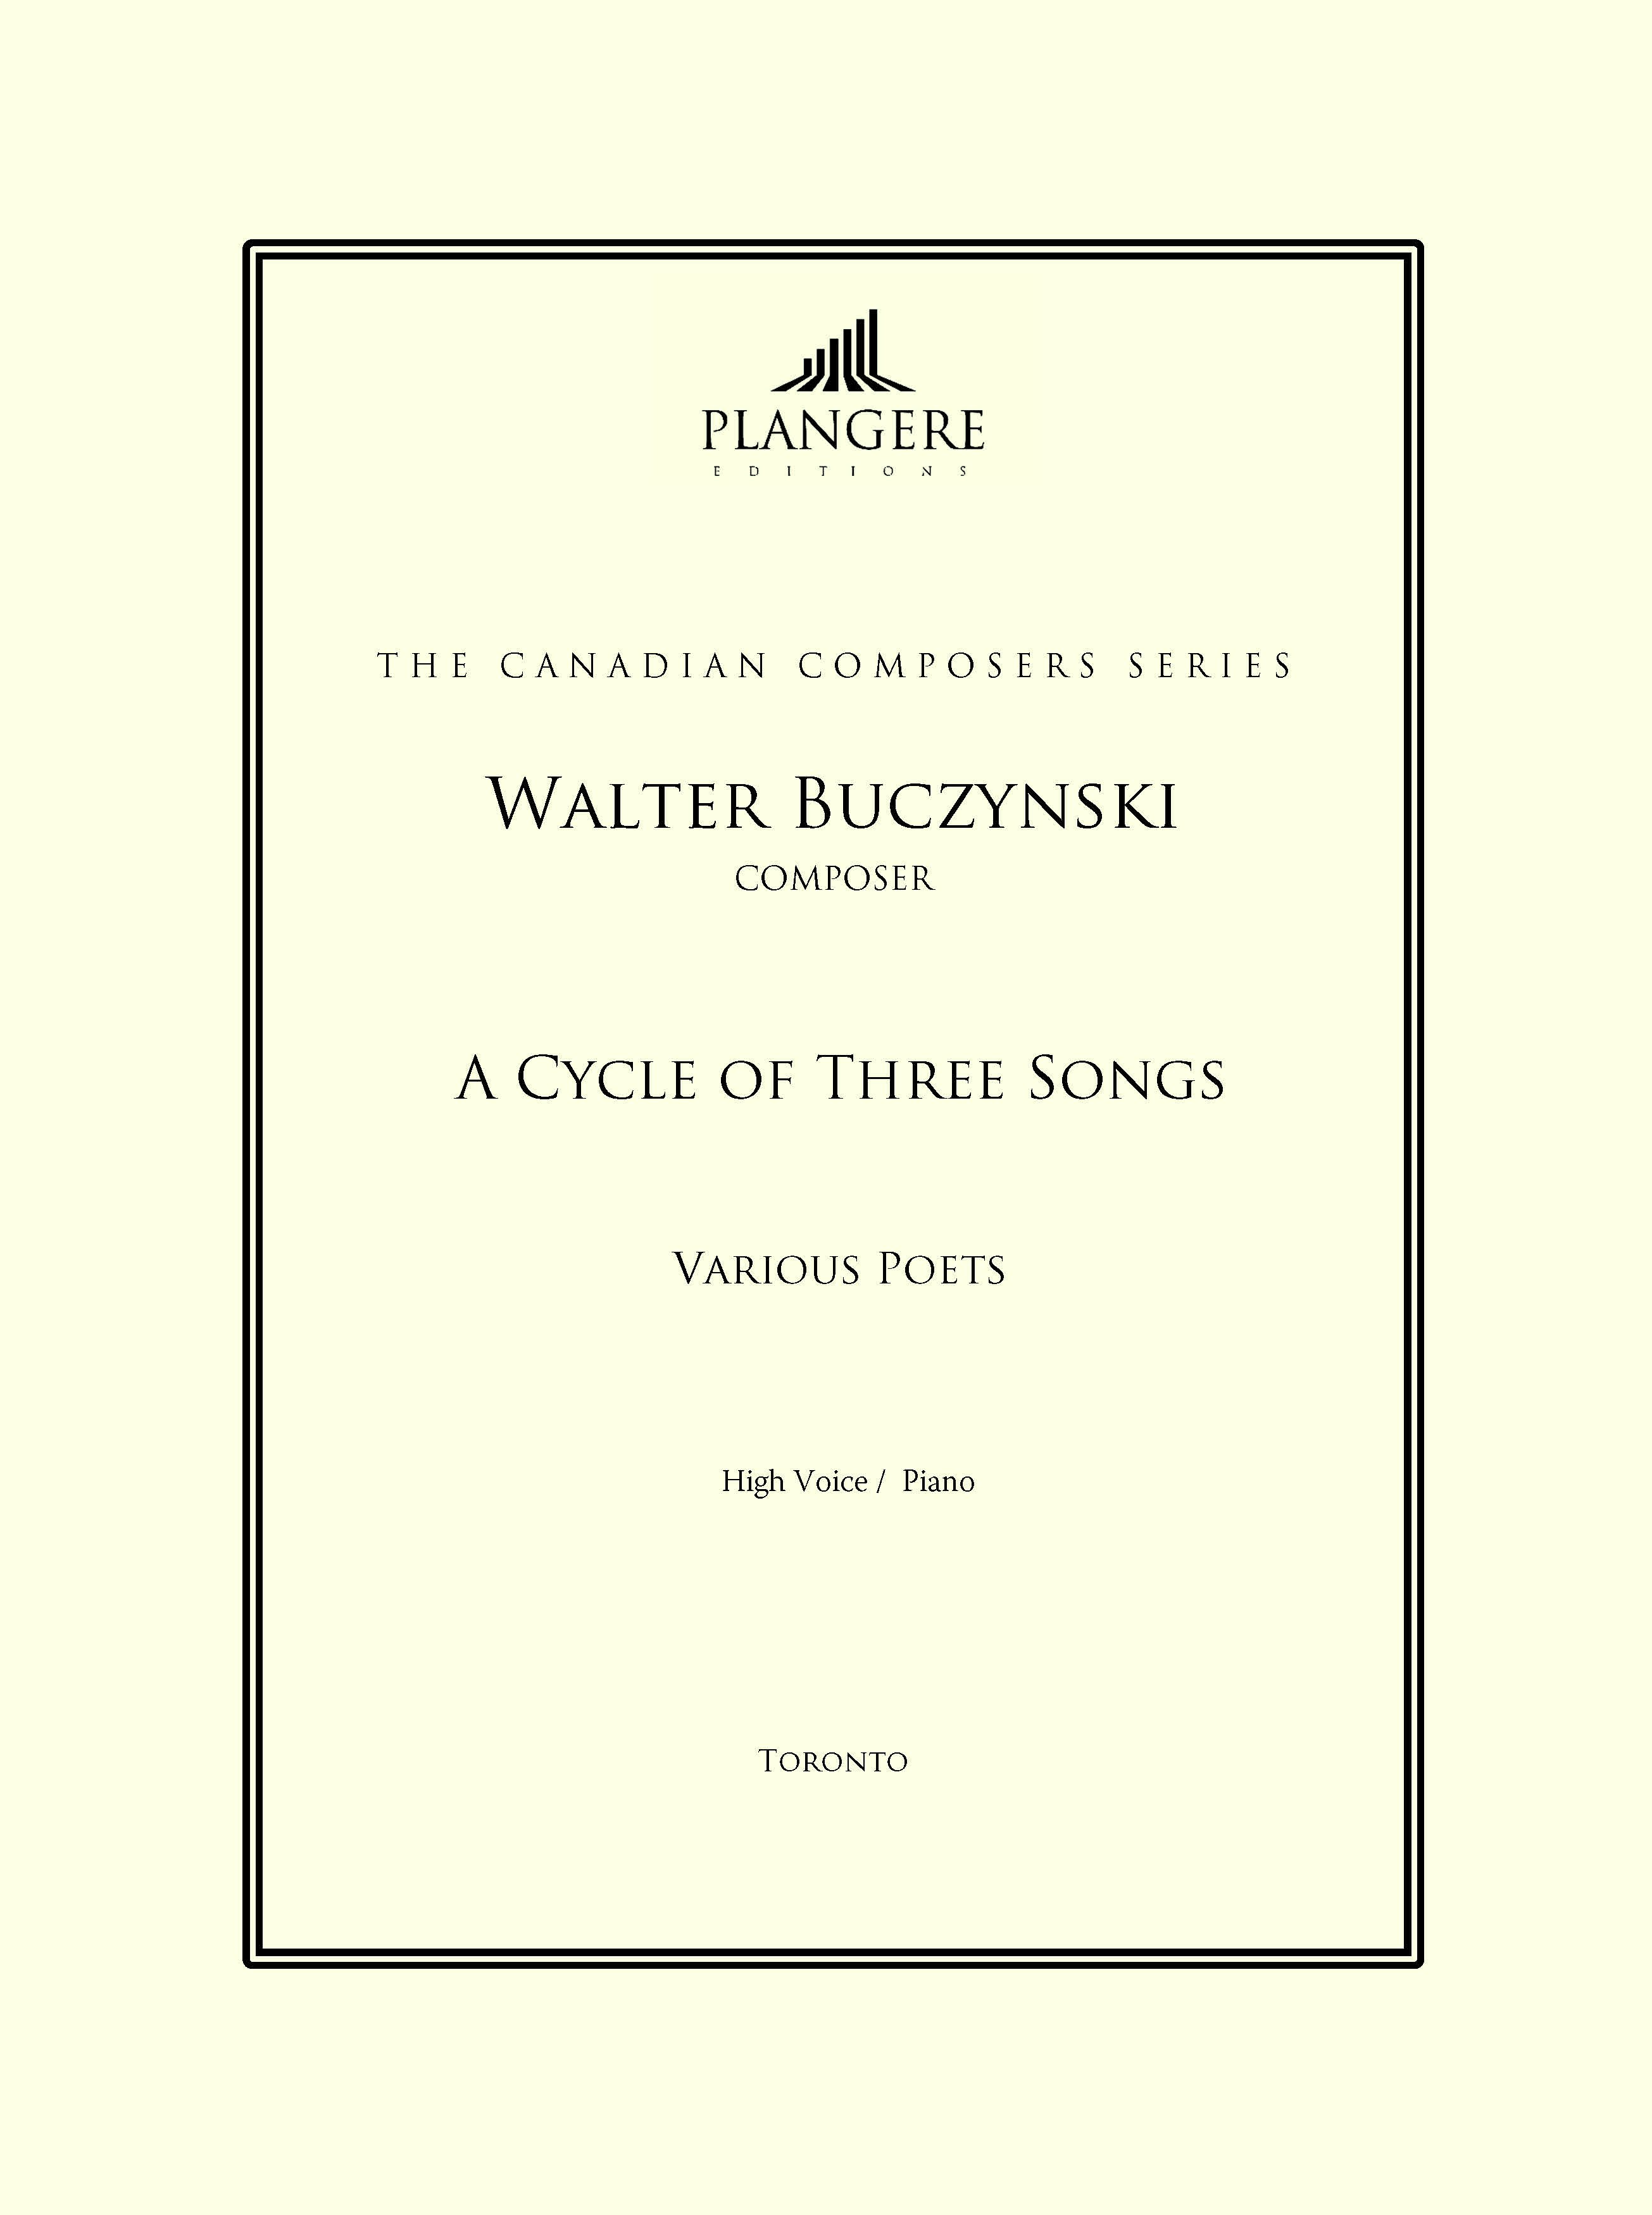 A Cycle of Three Songs